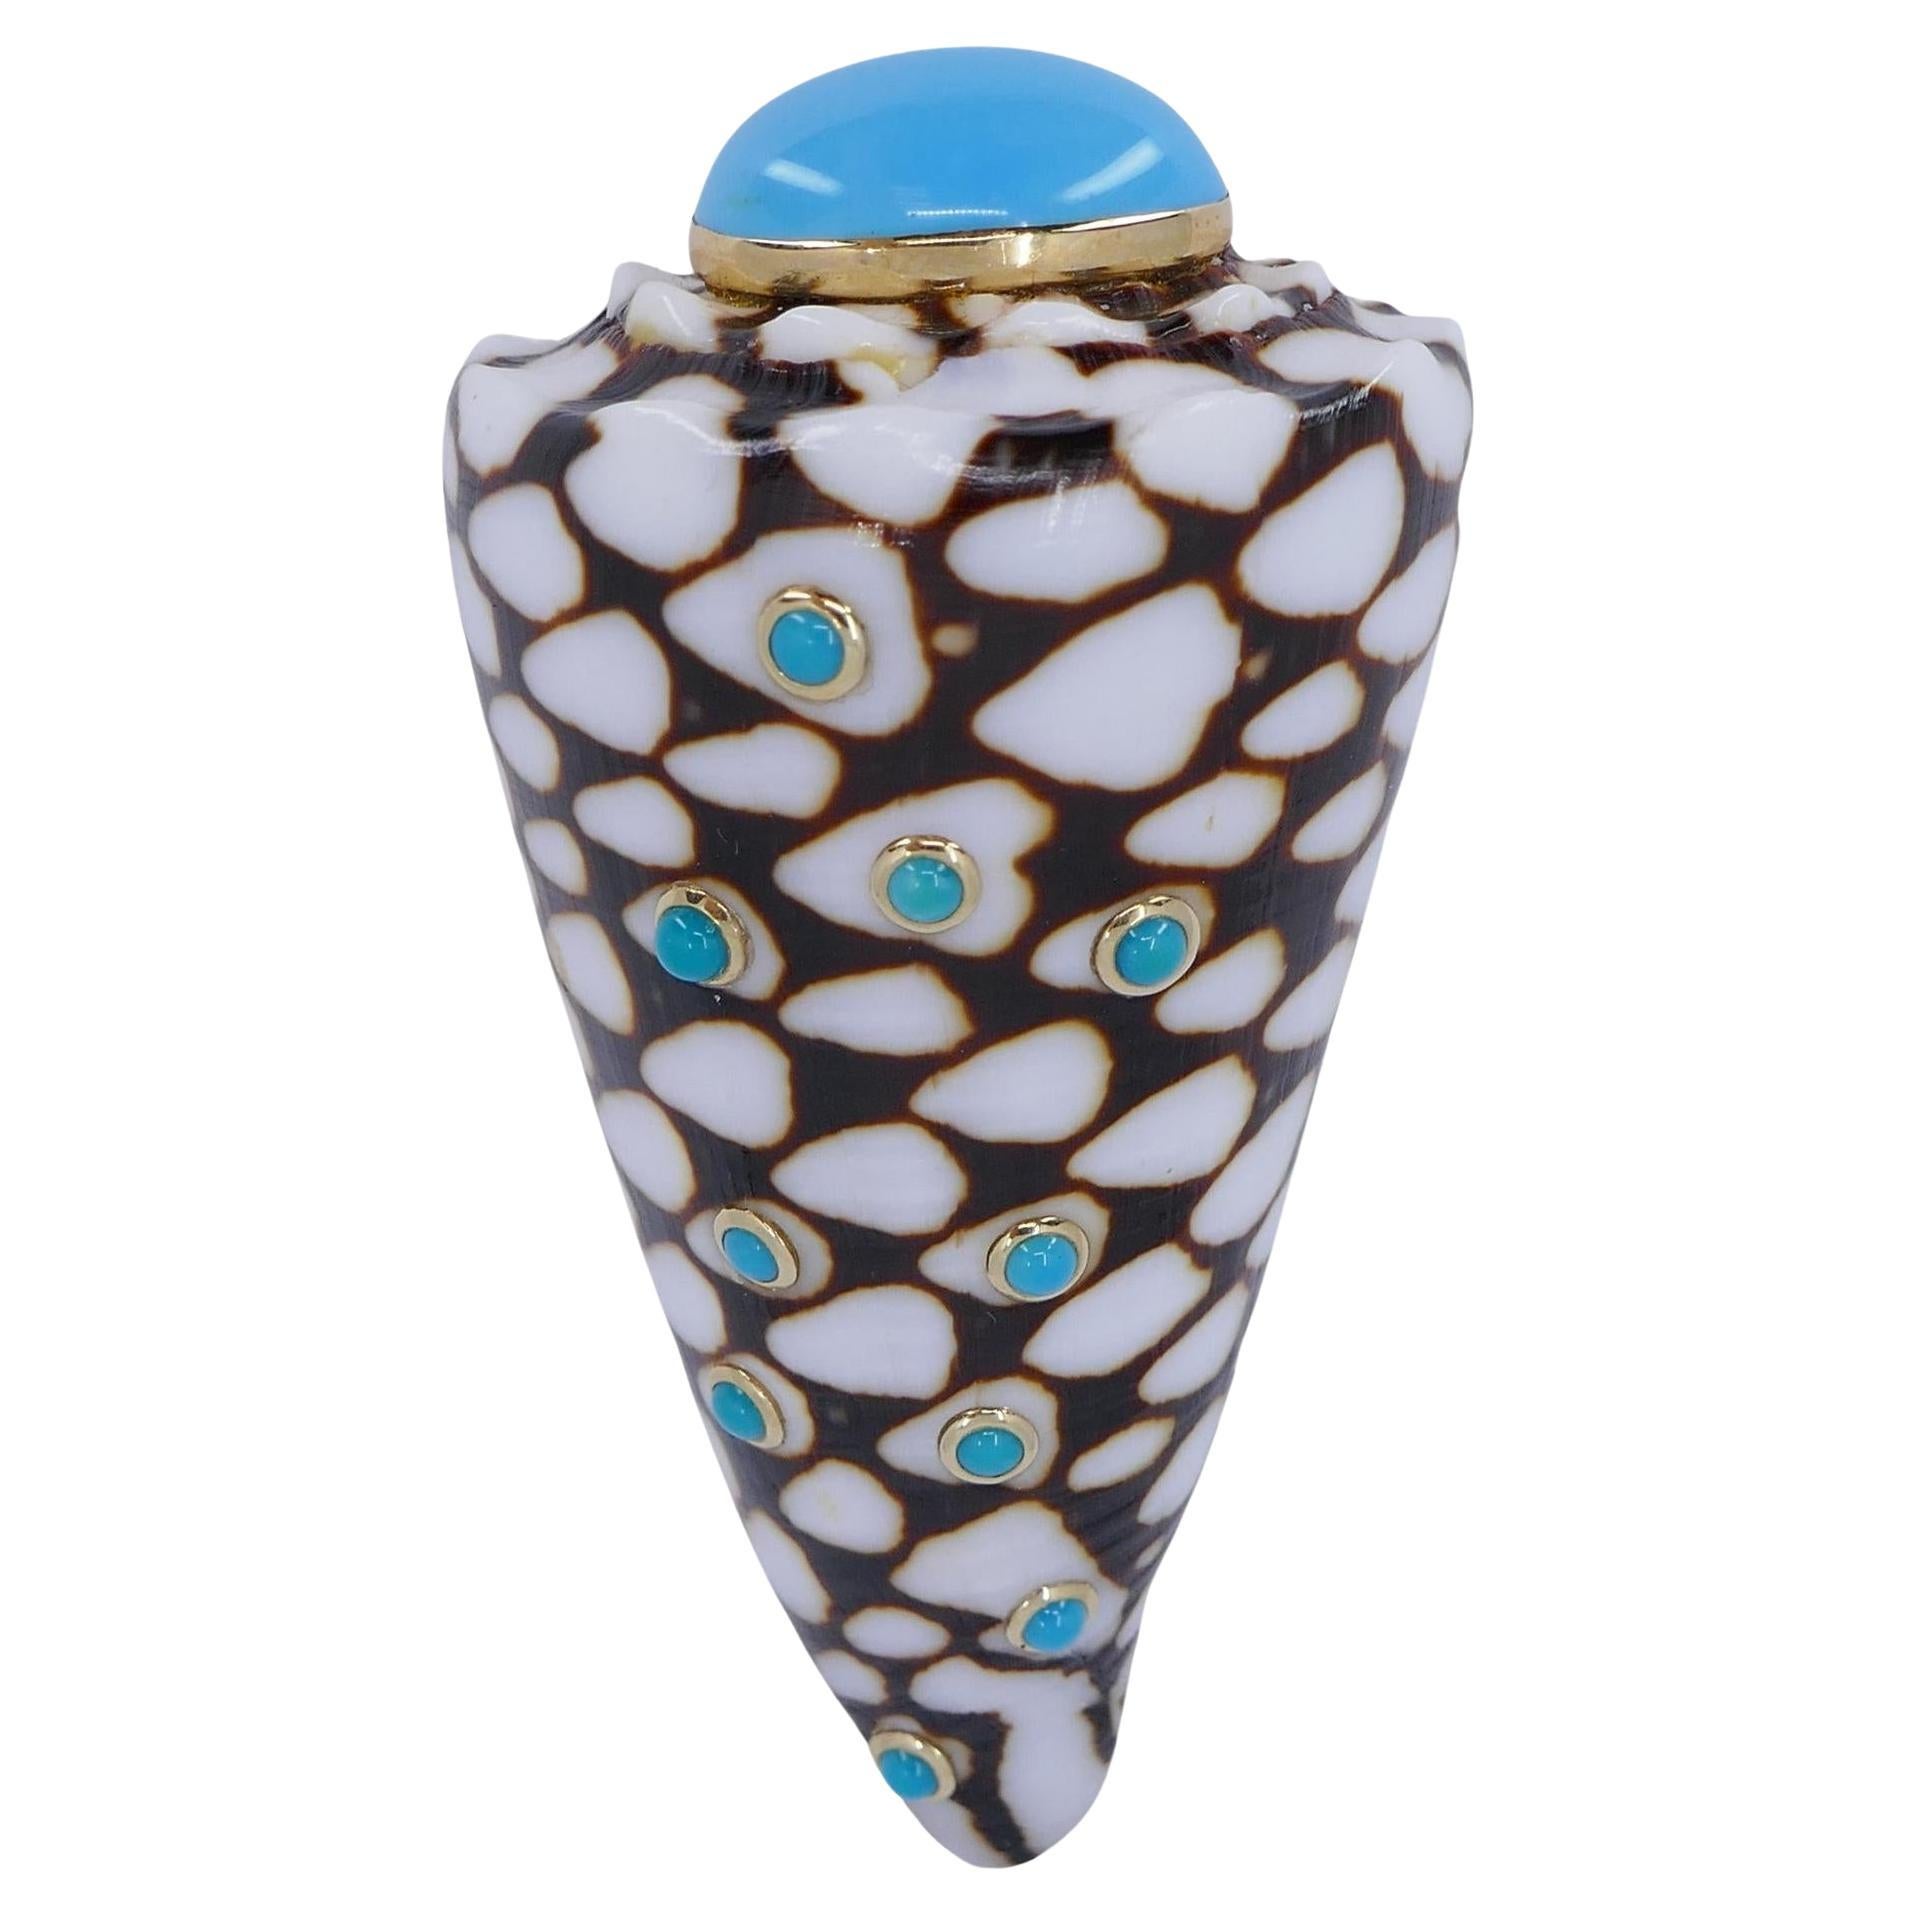 Trianon Shell Gold Brooch with Turquoise